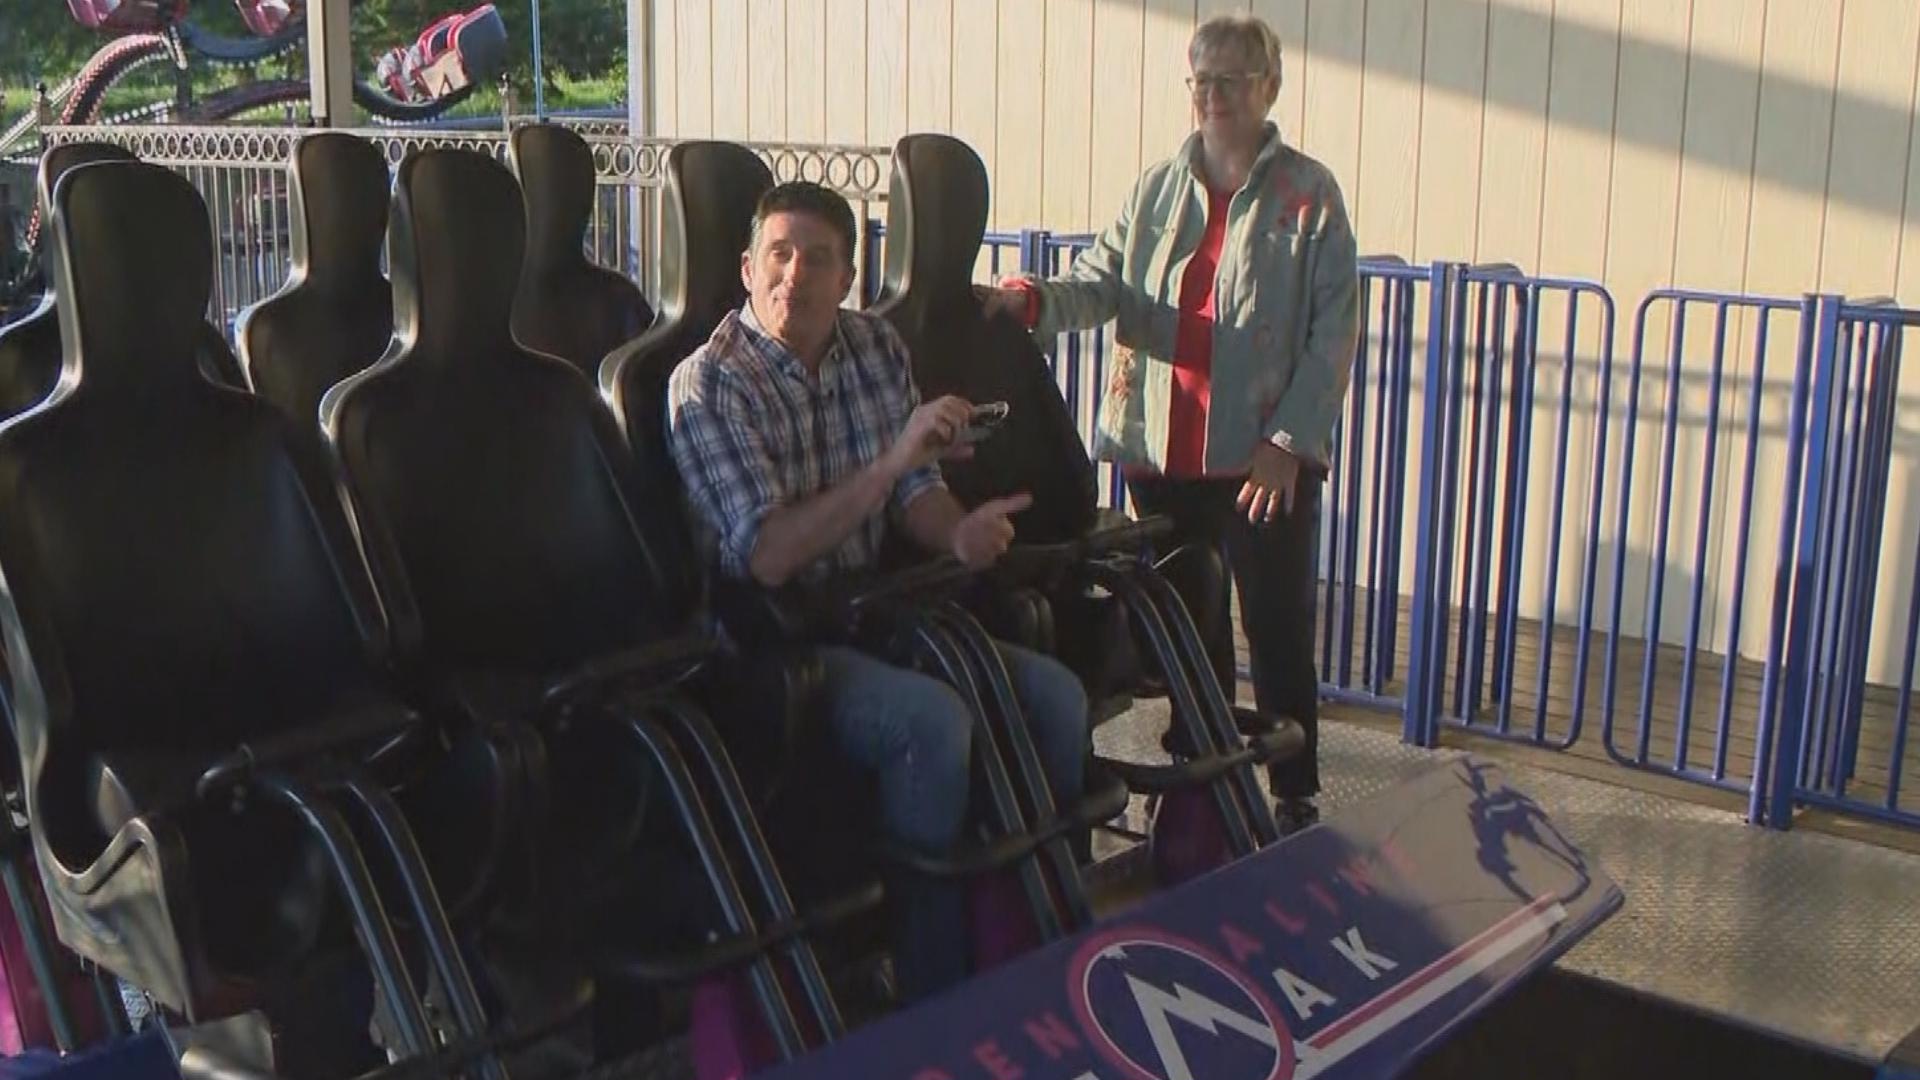 The Multnomah County Fair runs May 27-May 29 at Oaks Park. Drew Carney checked out all the fun and rode one of the rollercoasters.